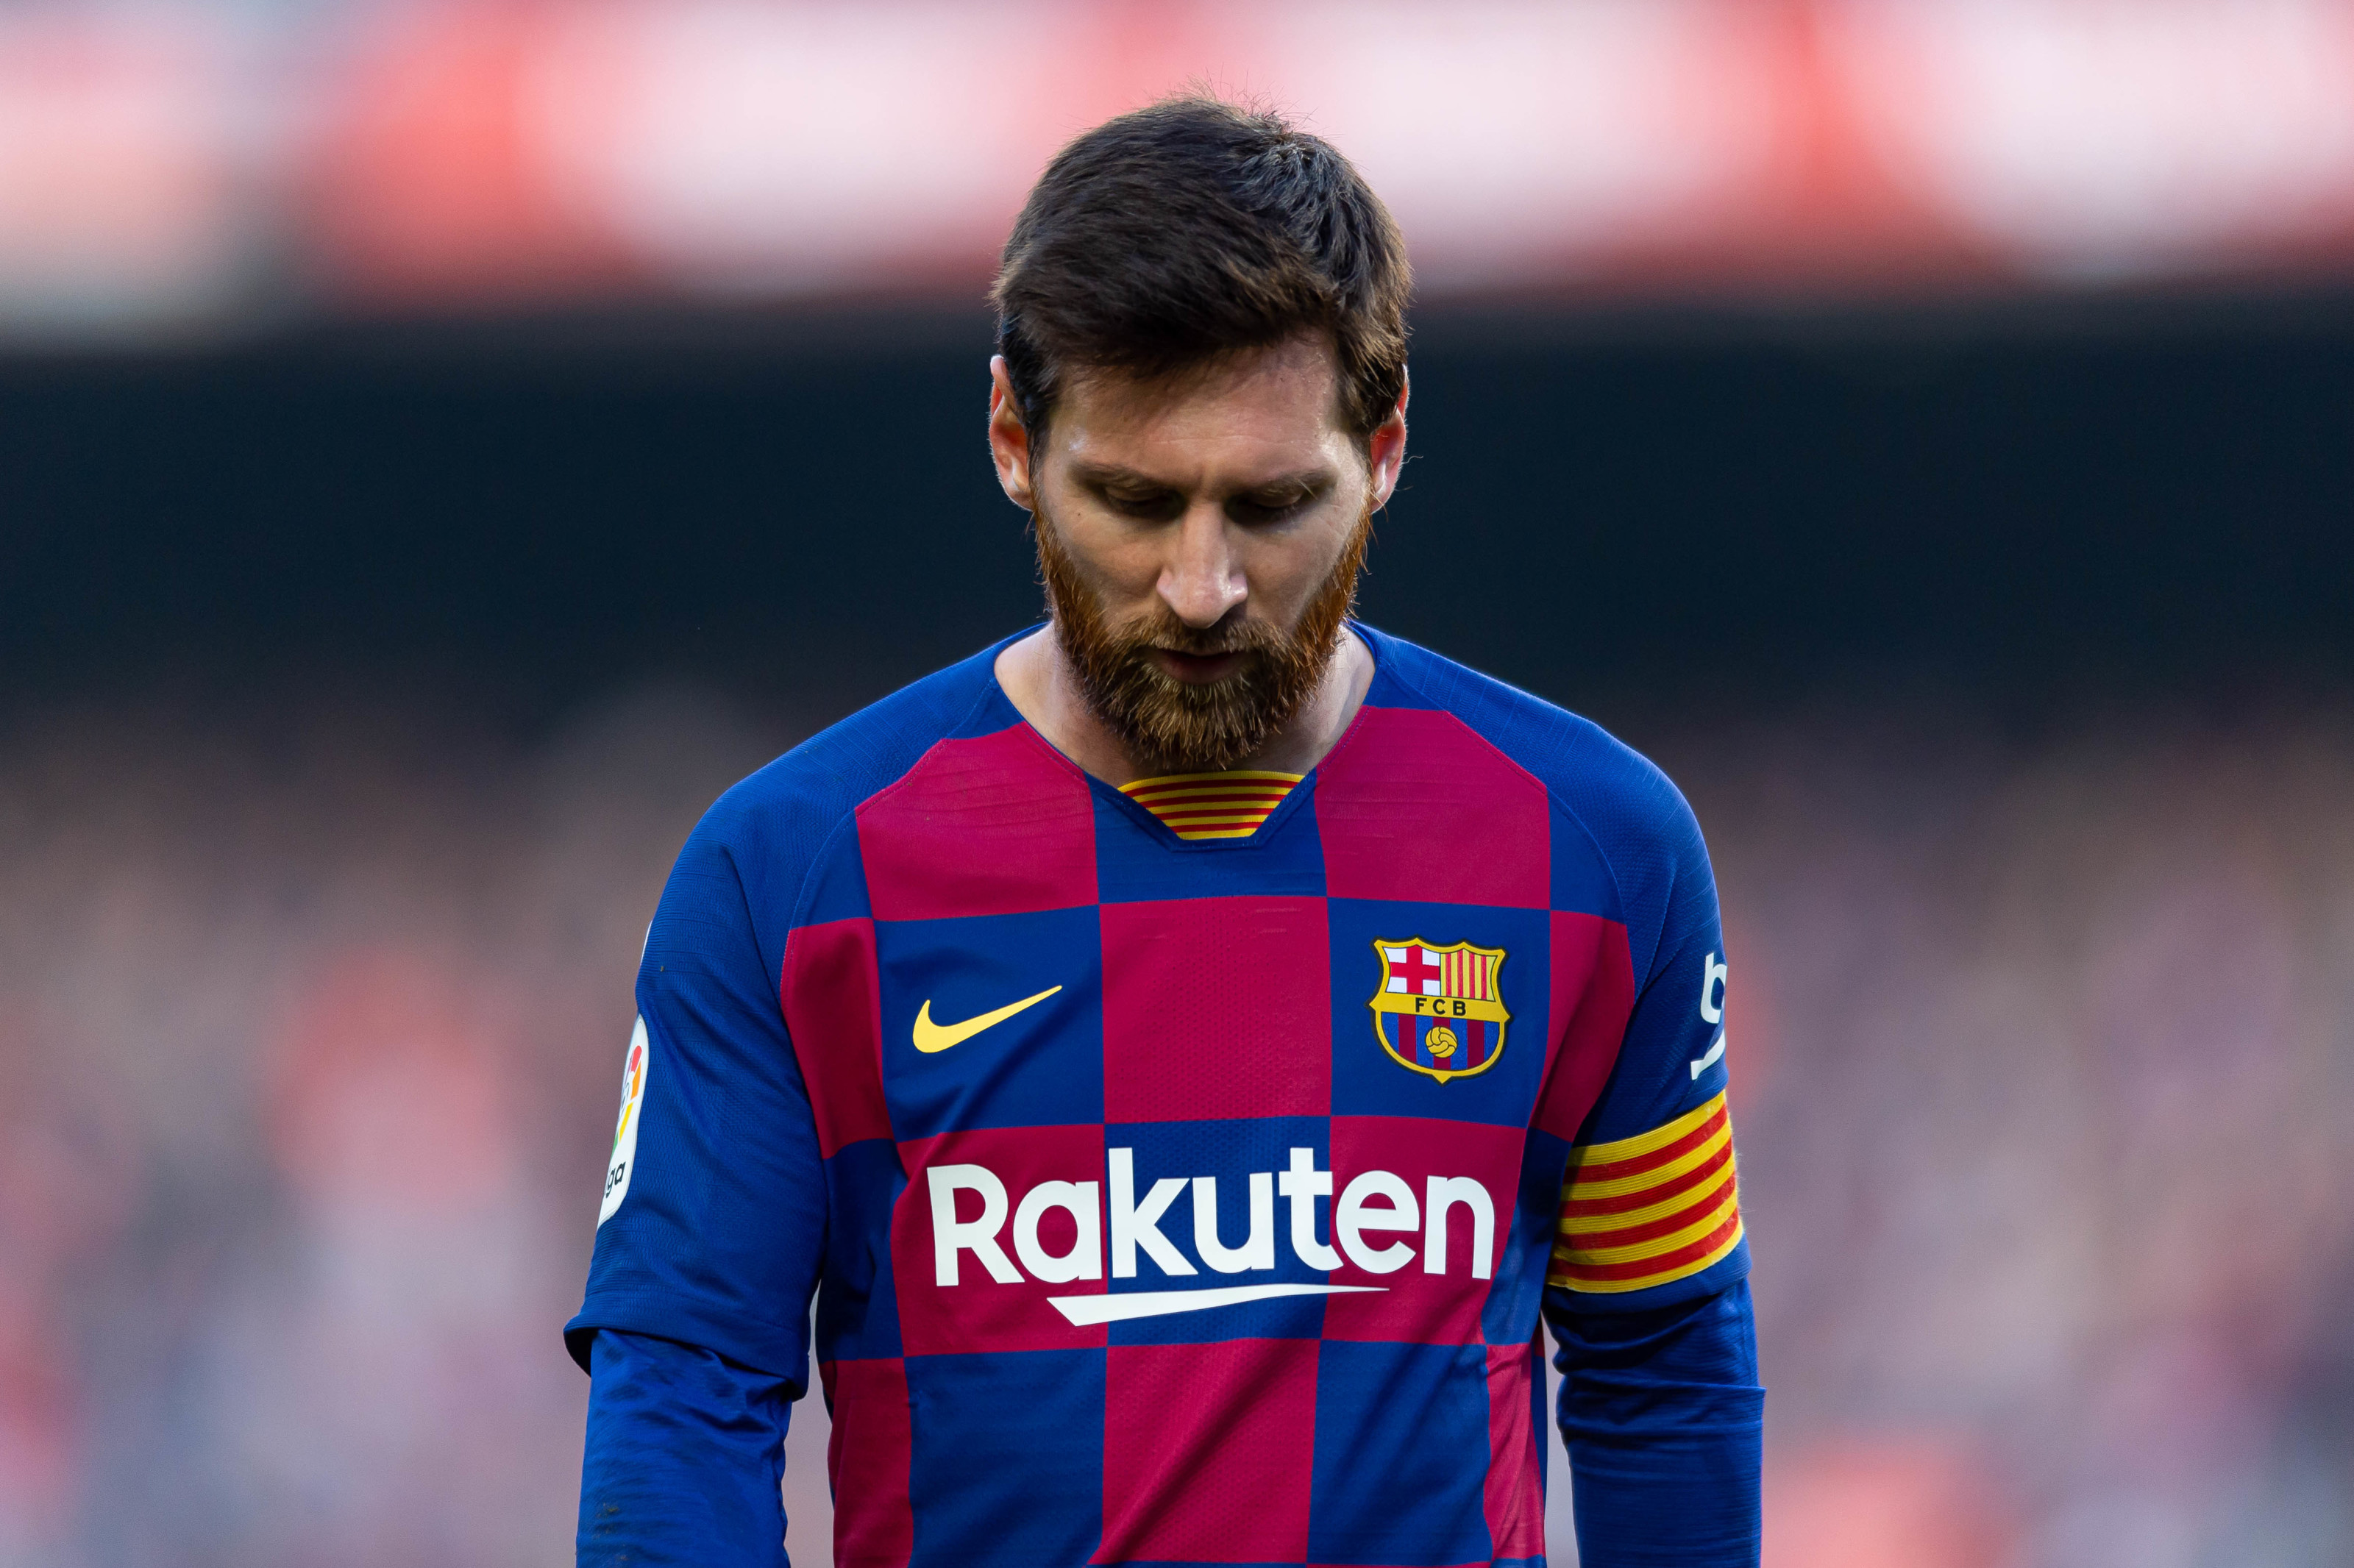 When I left they started watching baseball' – Lionel Messi in MLS